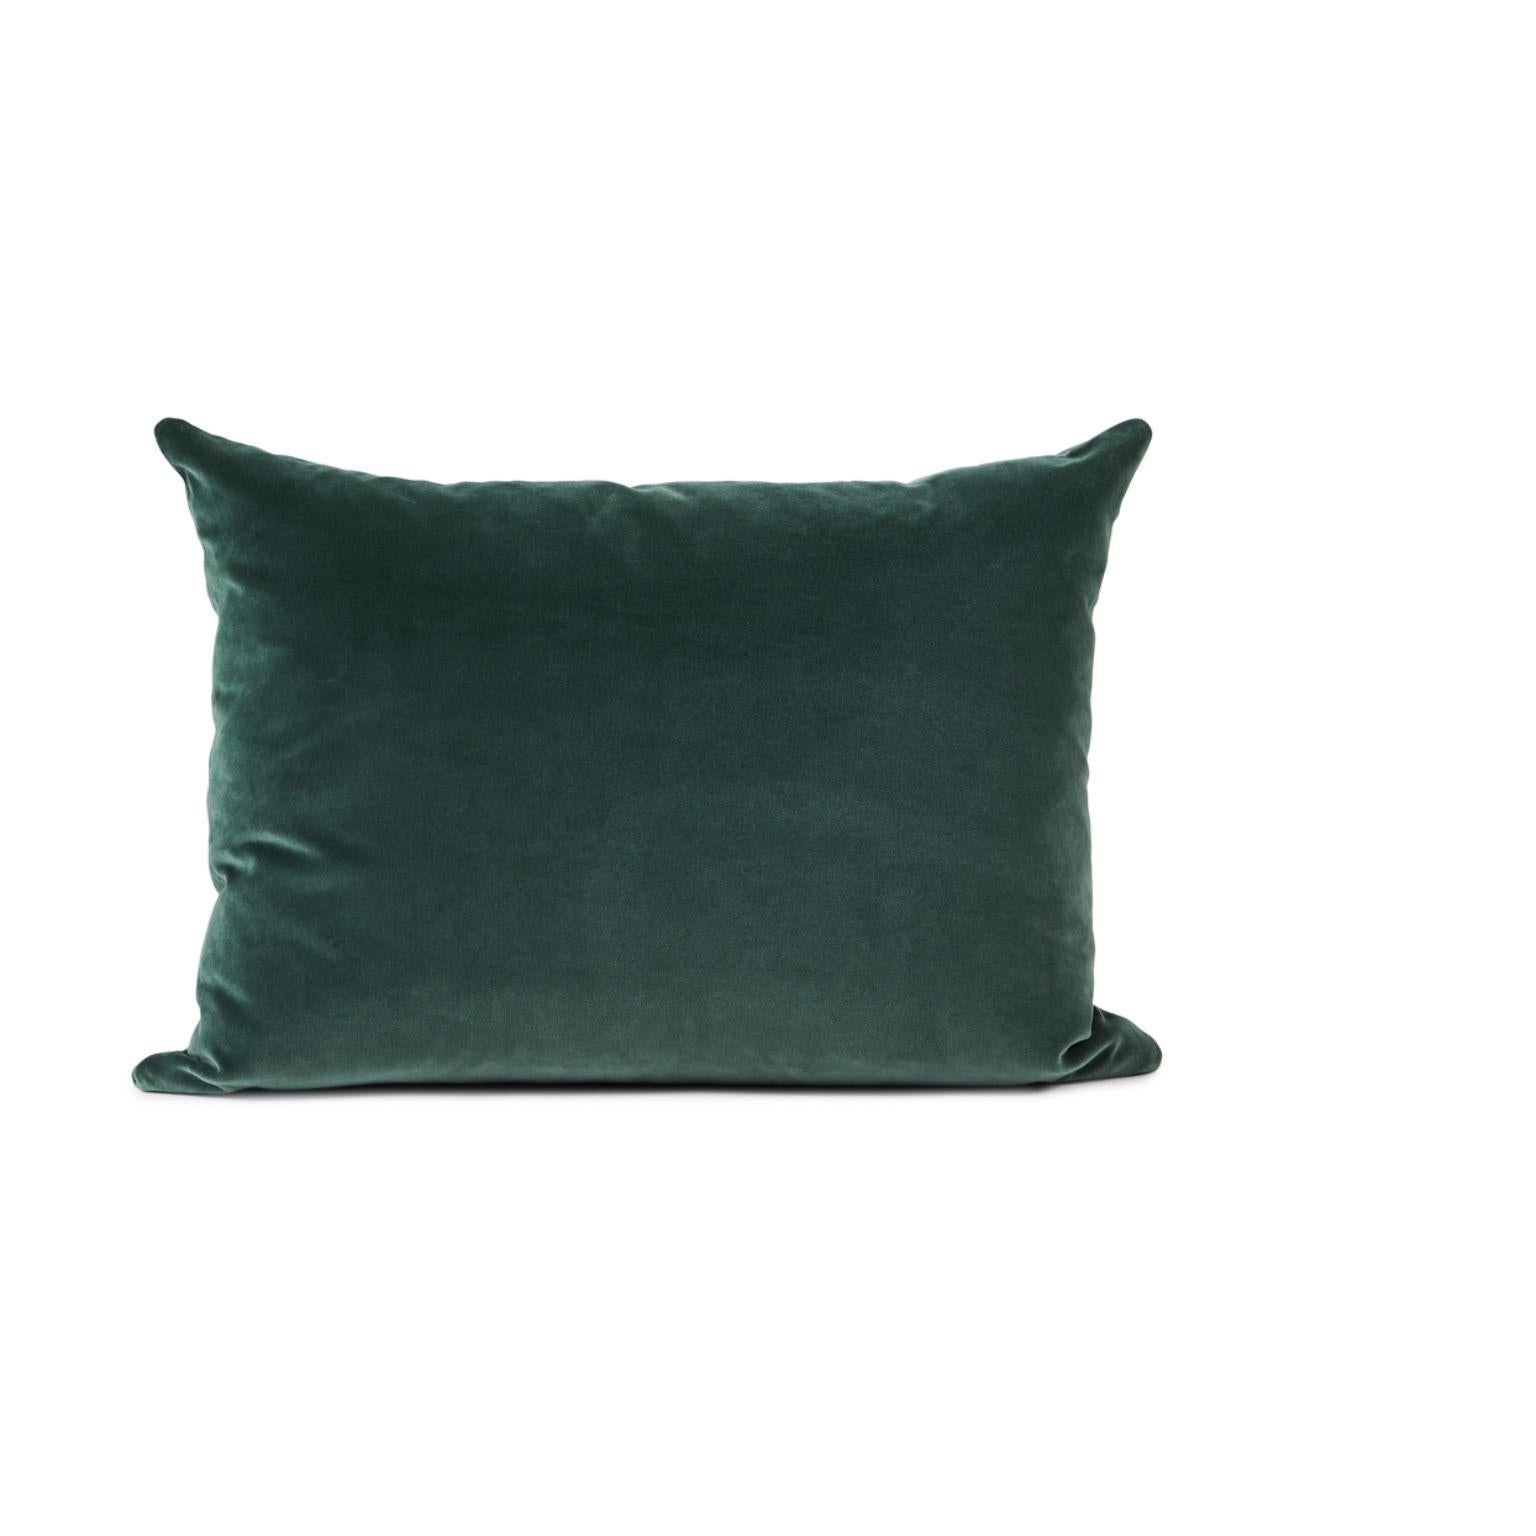 Galore cushion square forest green by Warm Nordic
Dimensions: W 70 x D 15 x H 50 cm
Material: textile upholstery, granulate and feathers filling.
Weight: 1.4 kg
Also available in different colours and finishes. 

An elegant oversized sofa